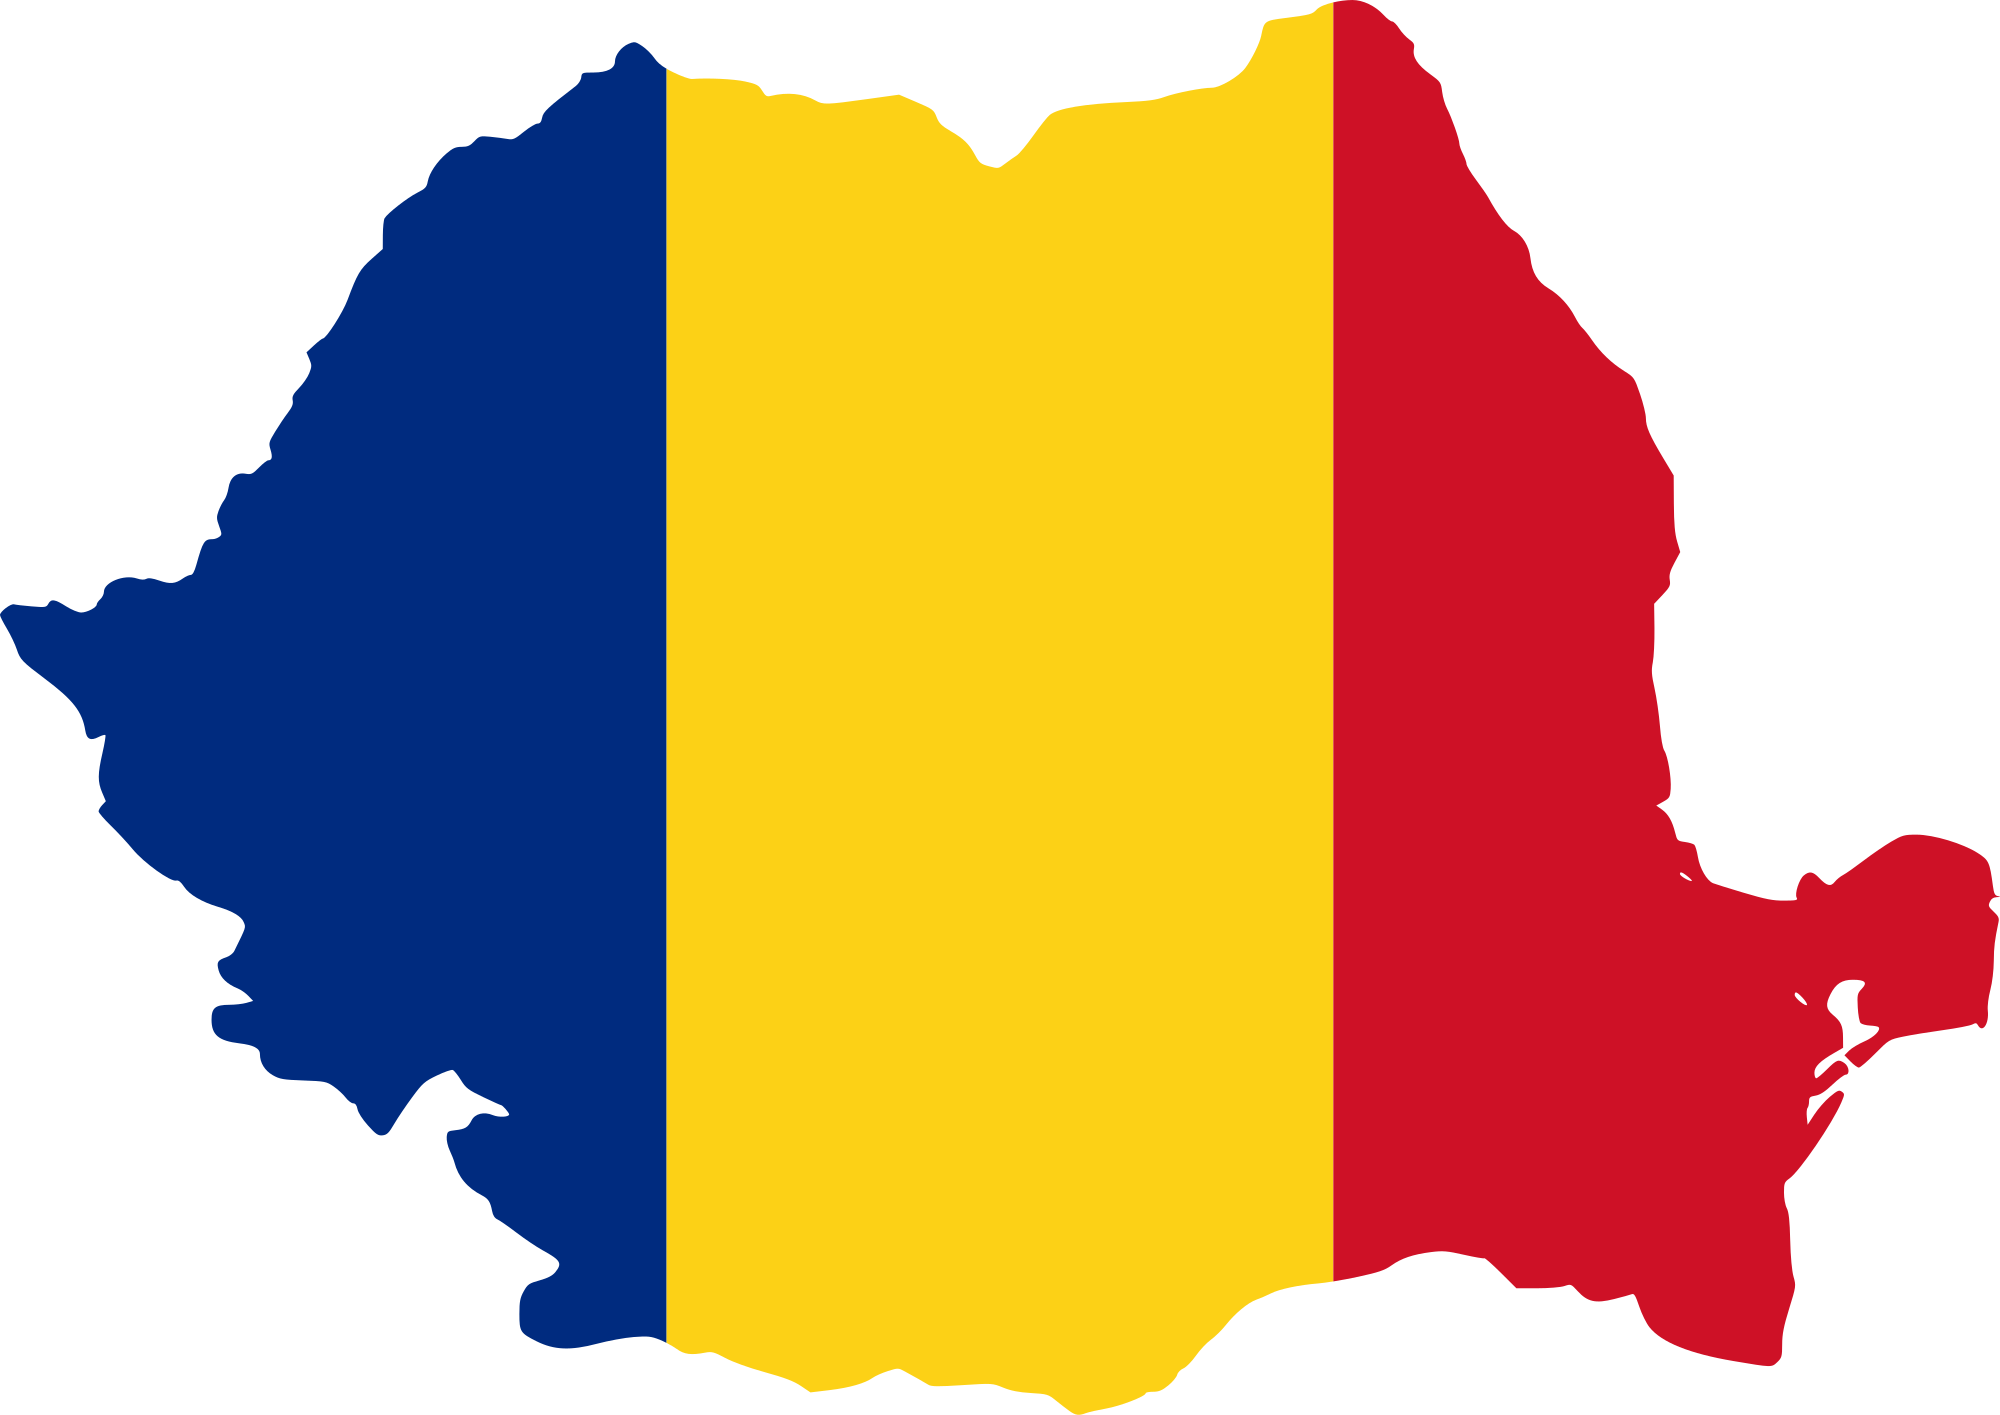 File:Flag map of Romania.svg - Wikimedia Commons